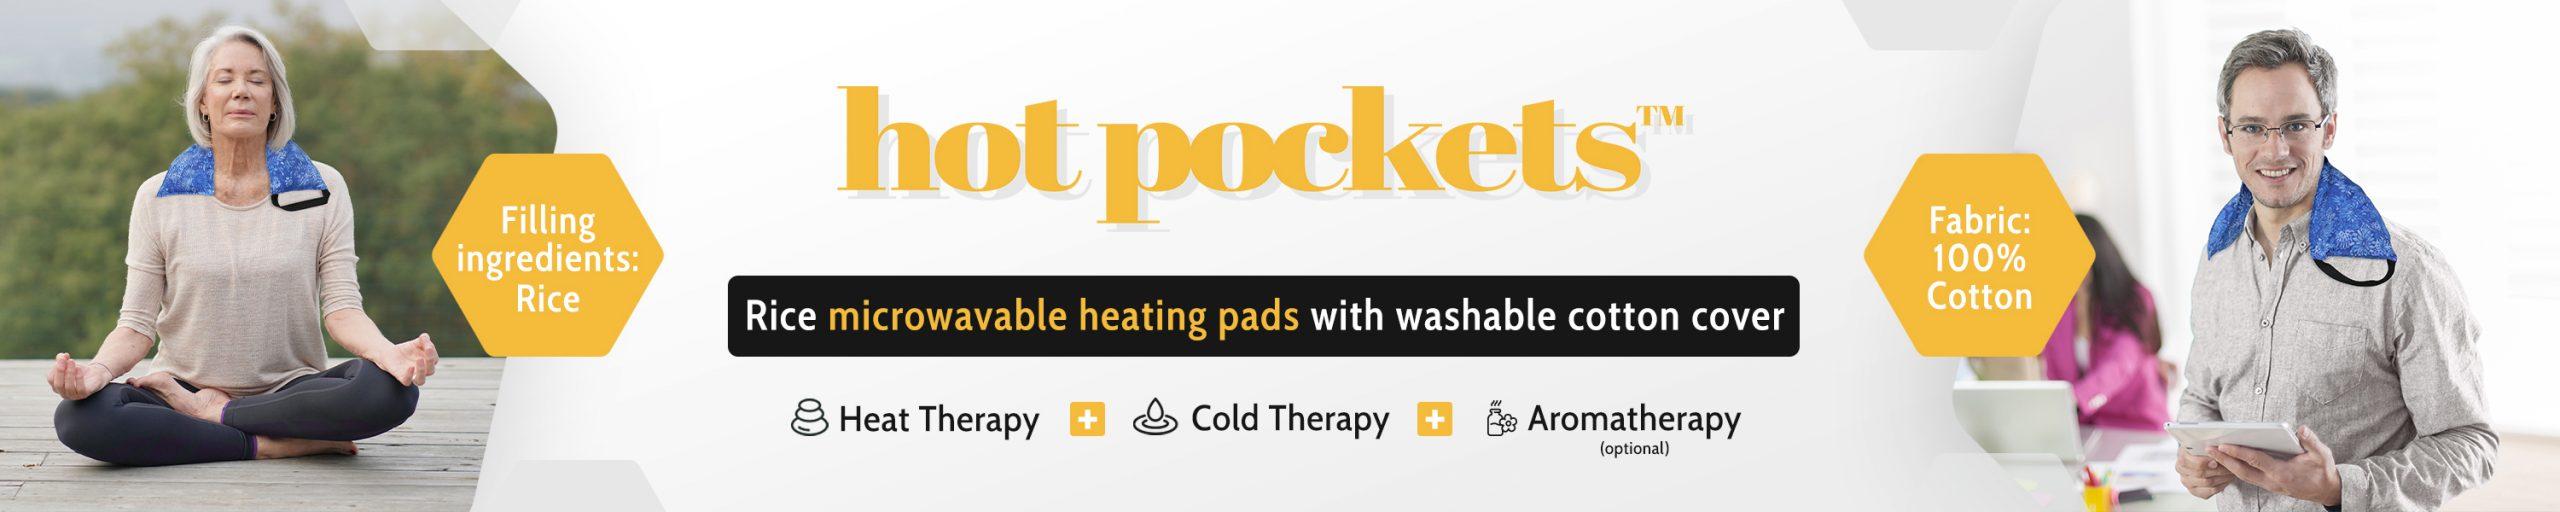 Hot Pockets - Microwavable Rice Heating Pads with Washable Covers